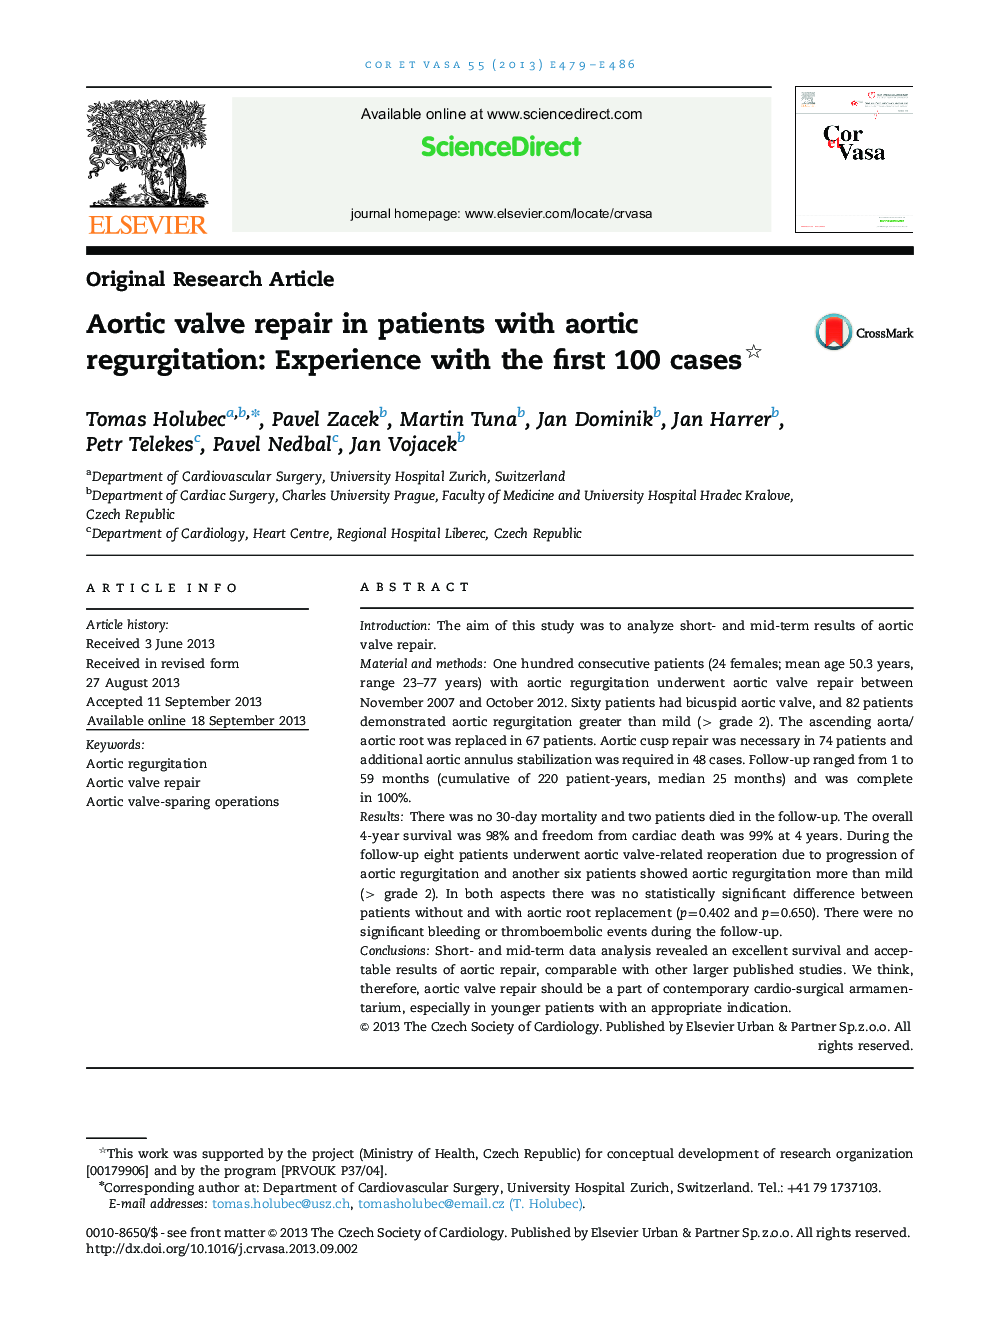 Aortic valve repair in patients with aortic regurgitation: Experience with the first 100 cases 